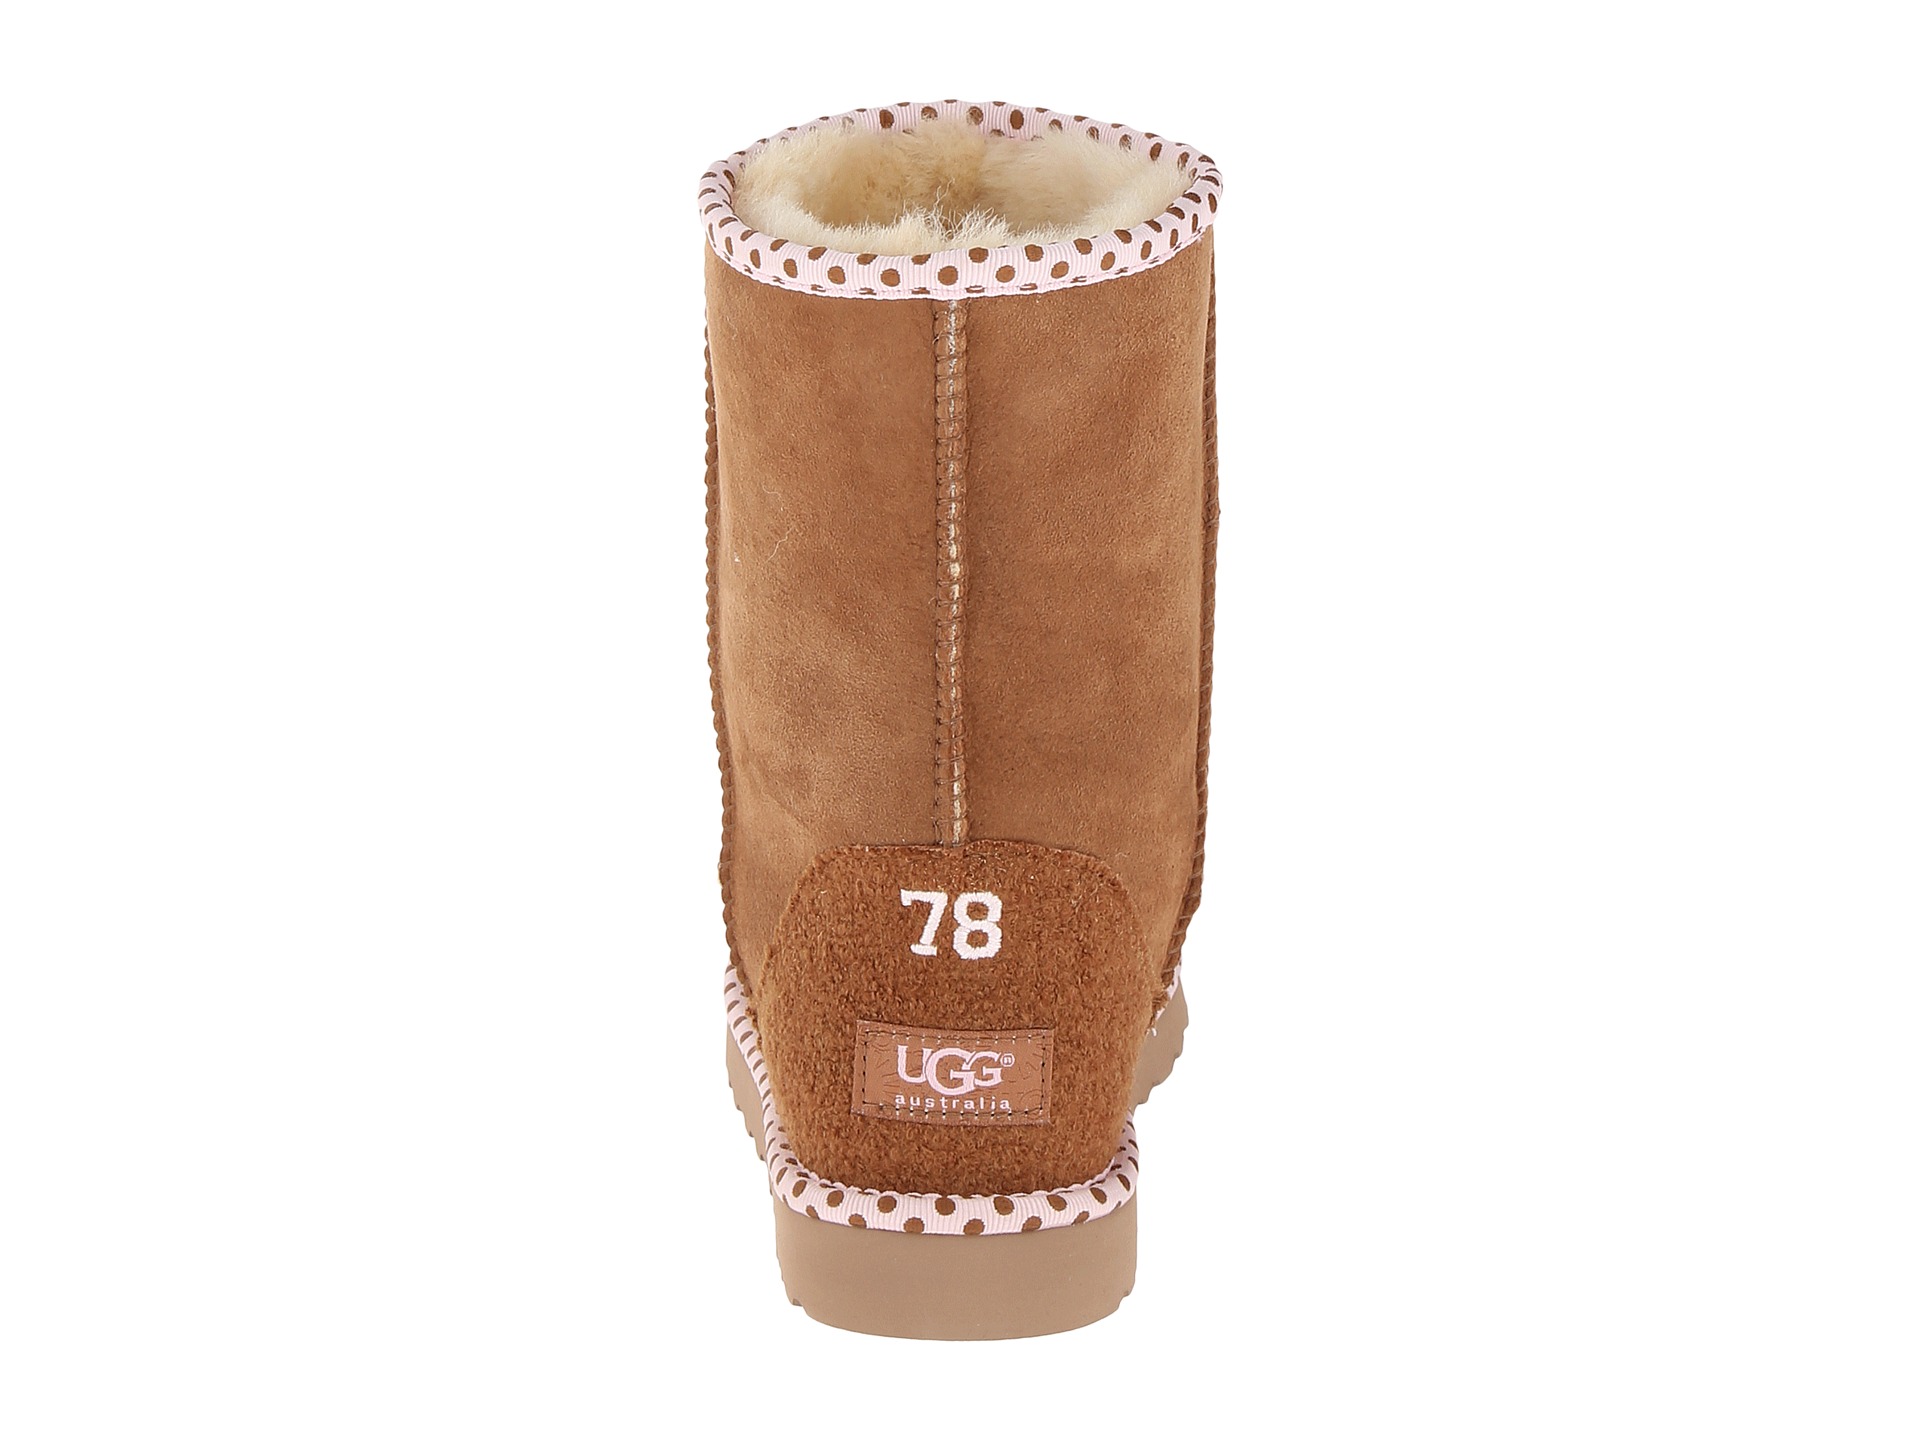 Ugg Classic Short 78 | Shipped Free at Zappos